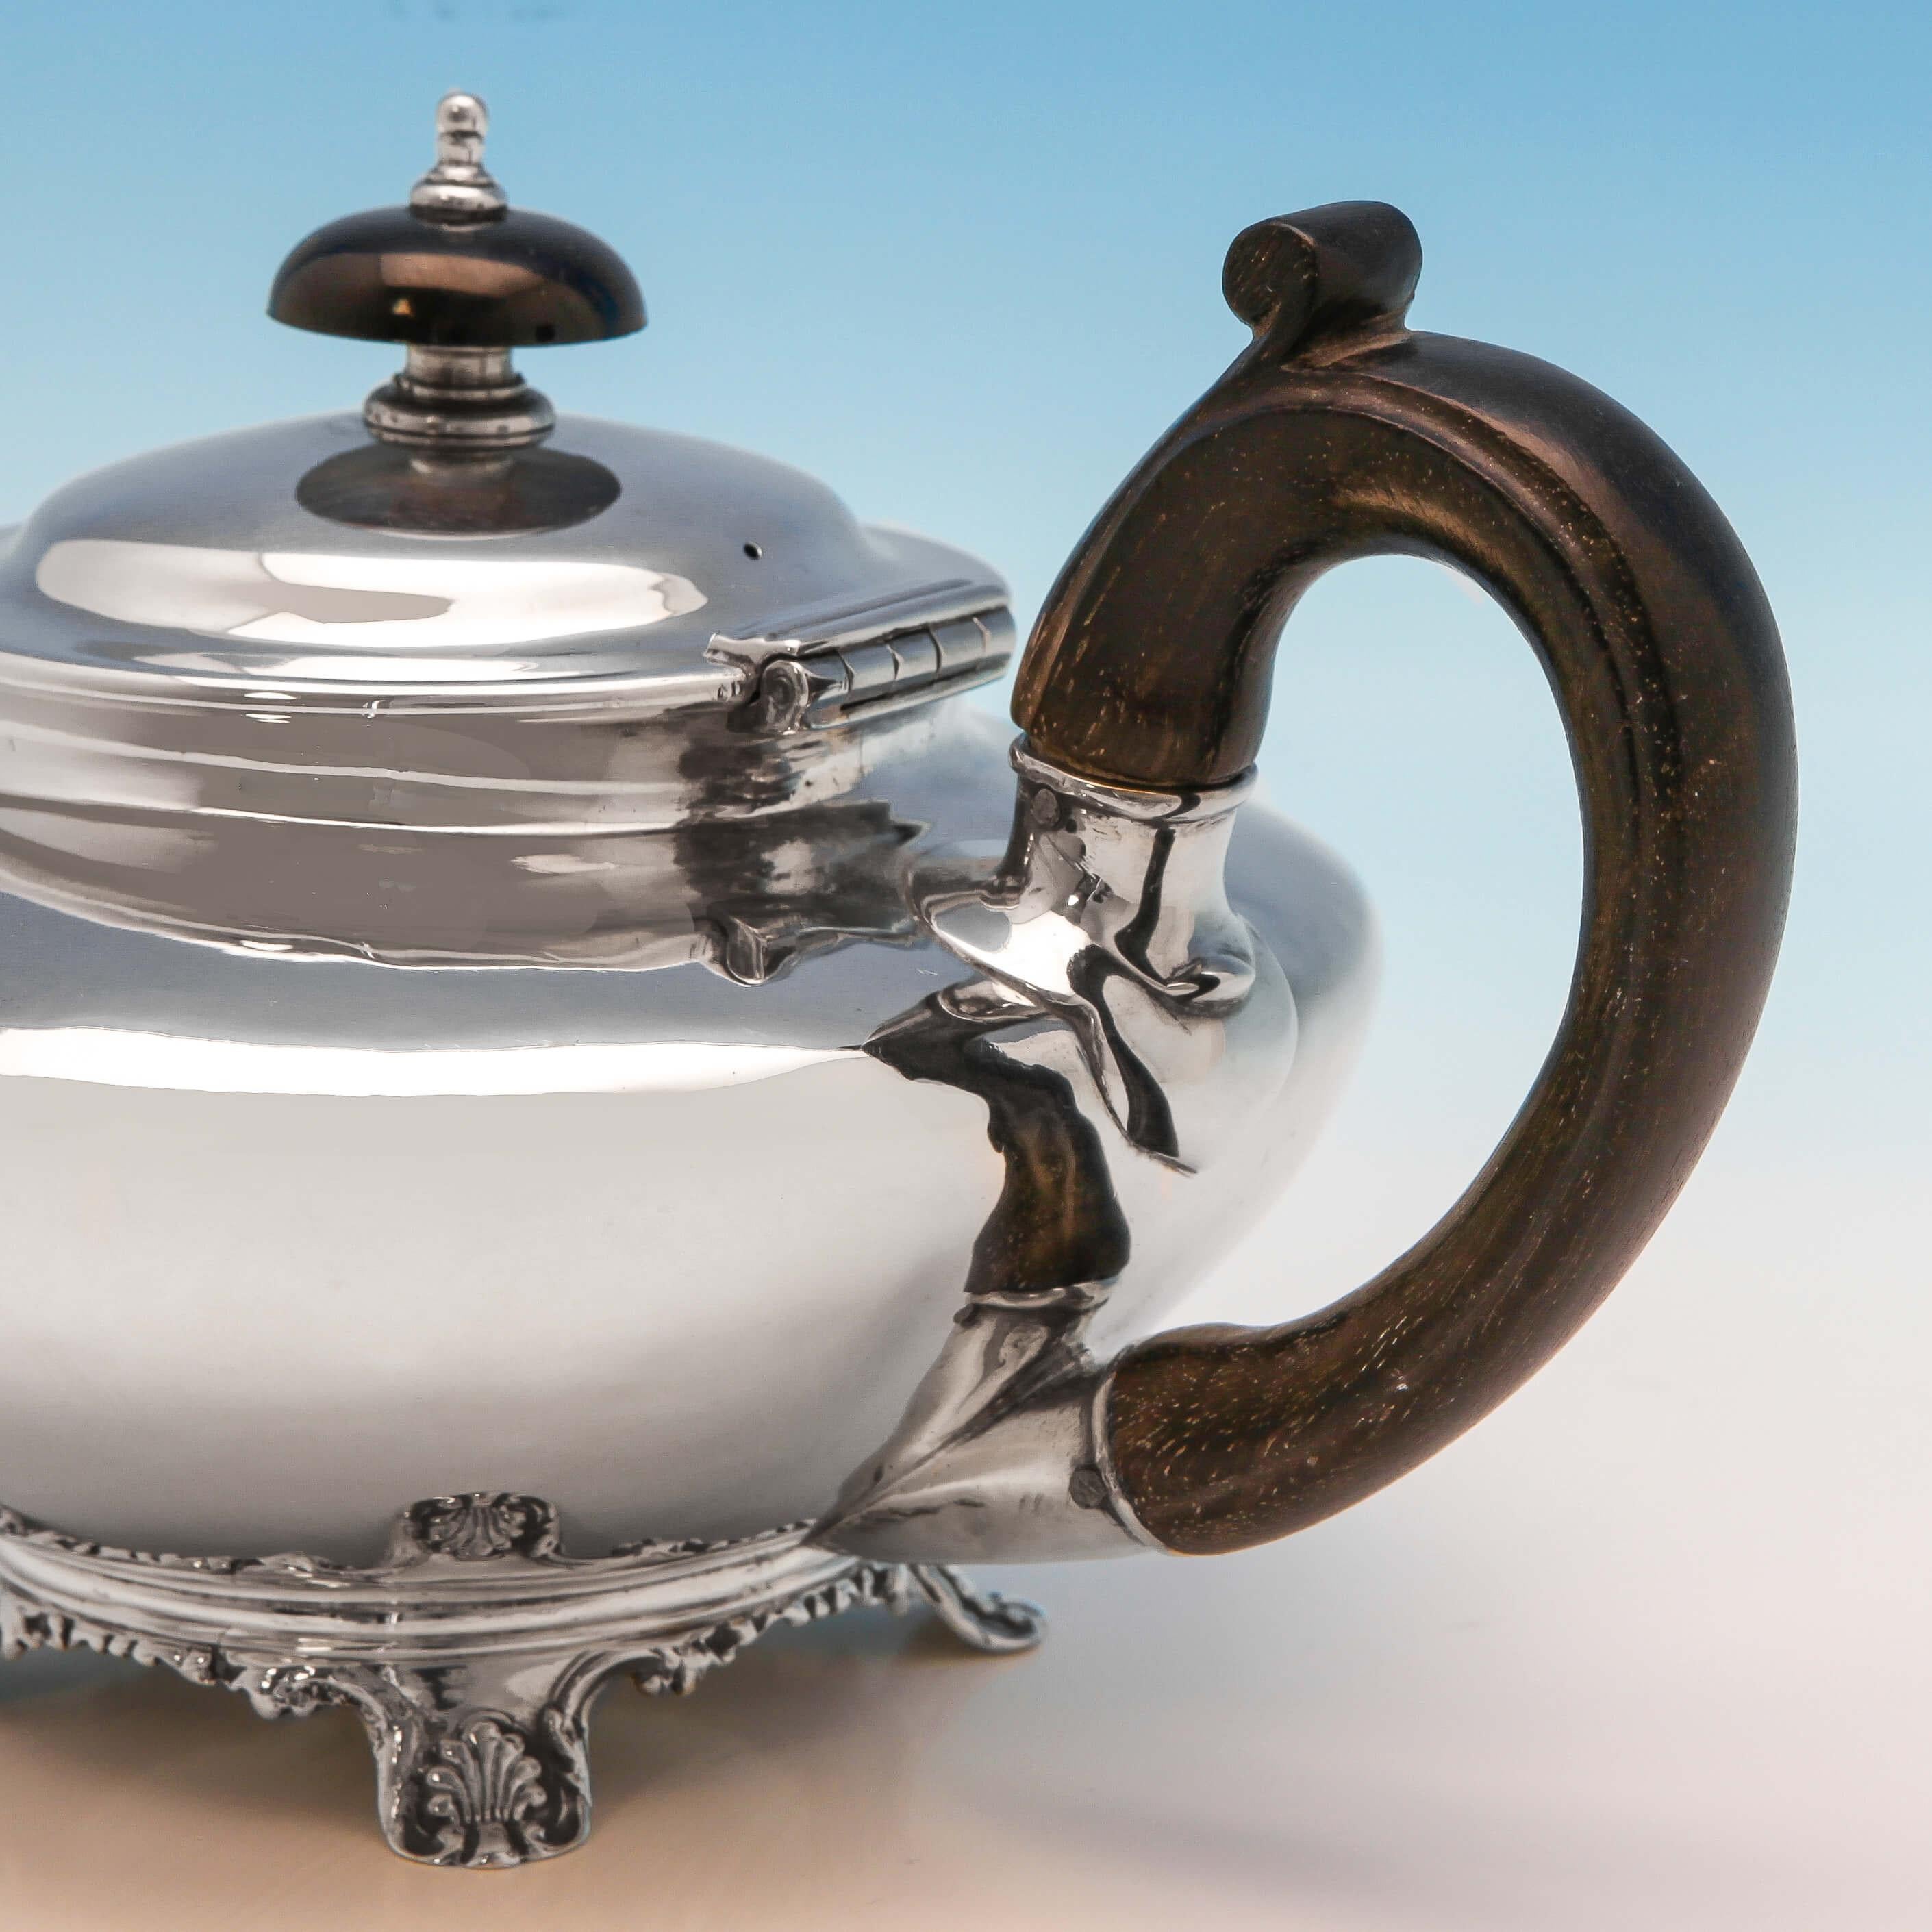 Hallmarked in London in 1835 by George Burrows II & Richard Pearce, this handsome, William IV, Antique Sterling Silver Teapot, is round in shape, plain in style, and features shell and scroll feet, and a wooden handle and finial. The teapot measures